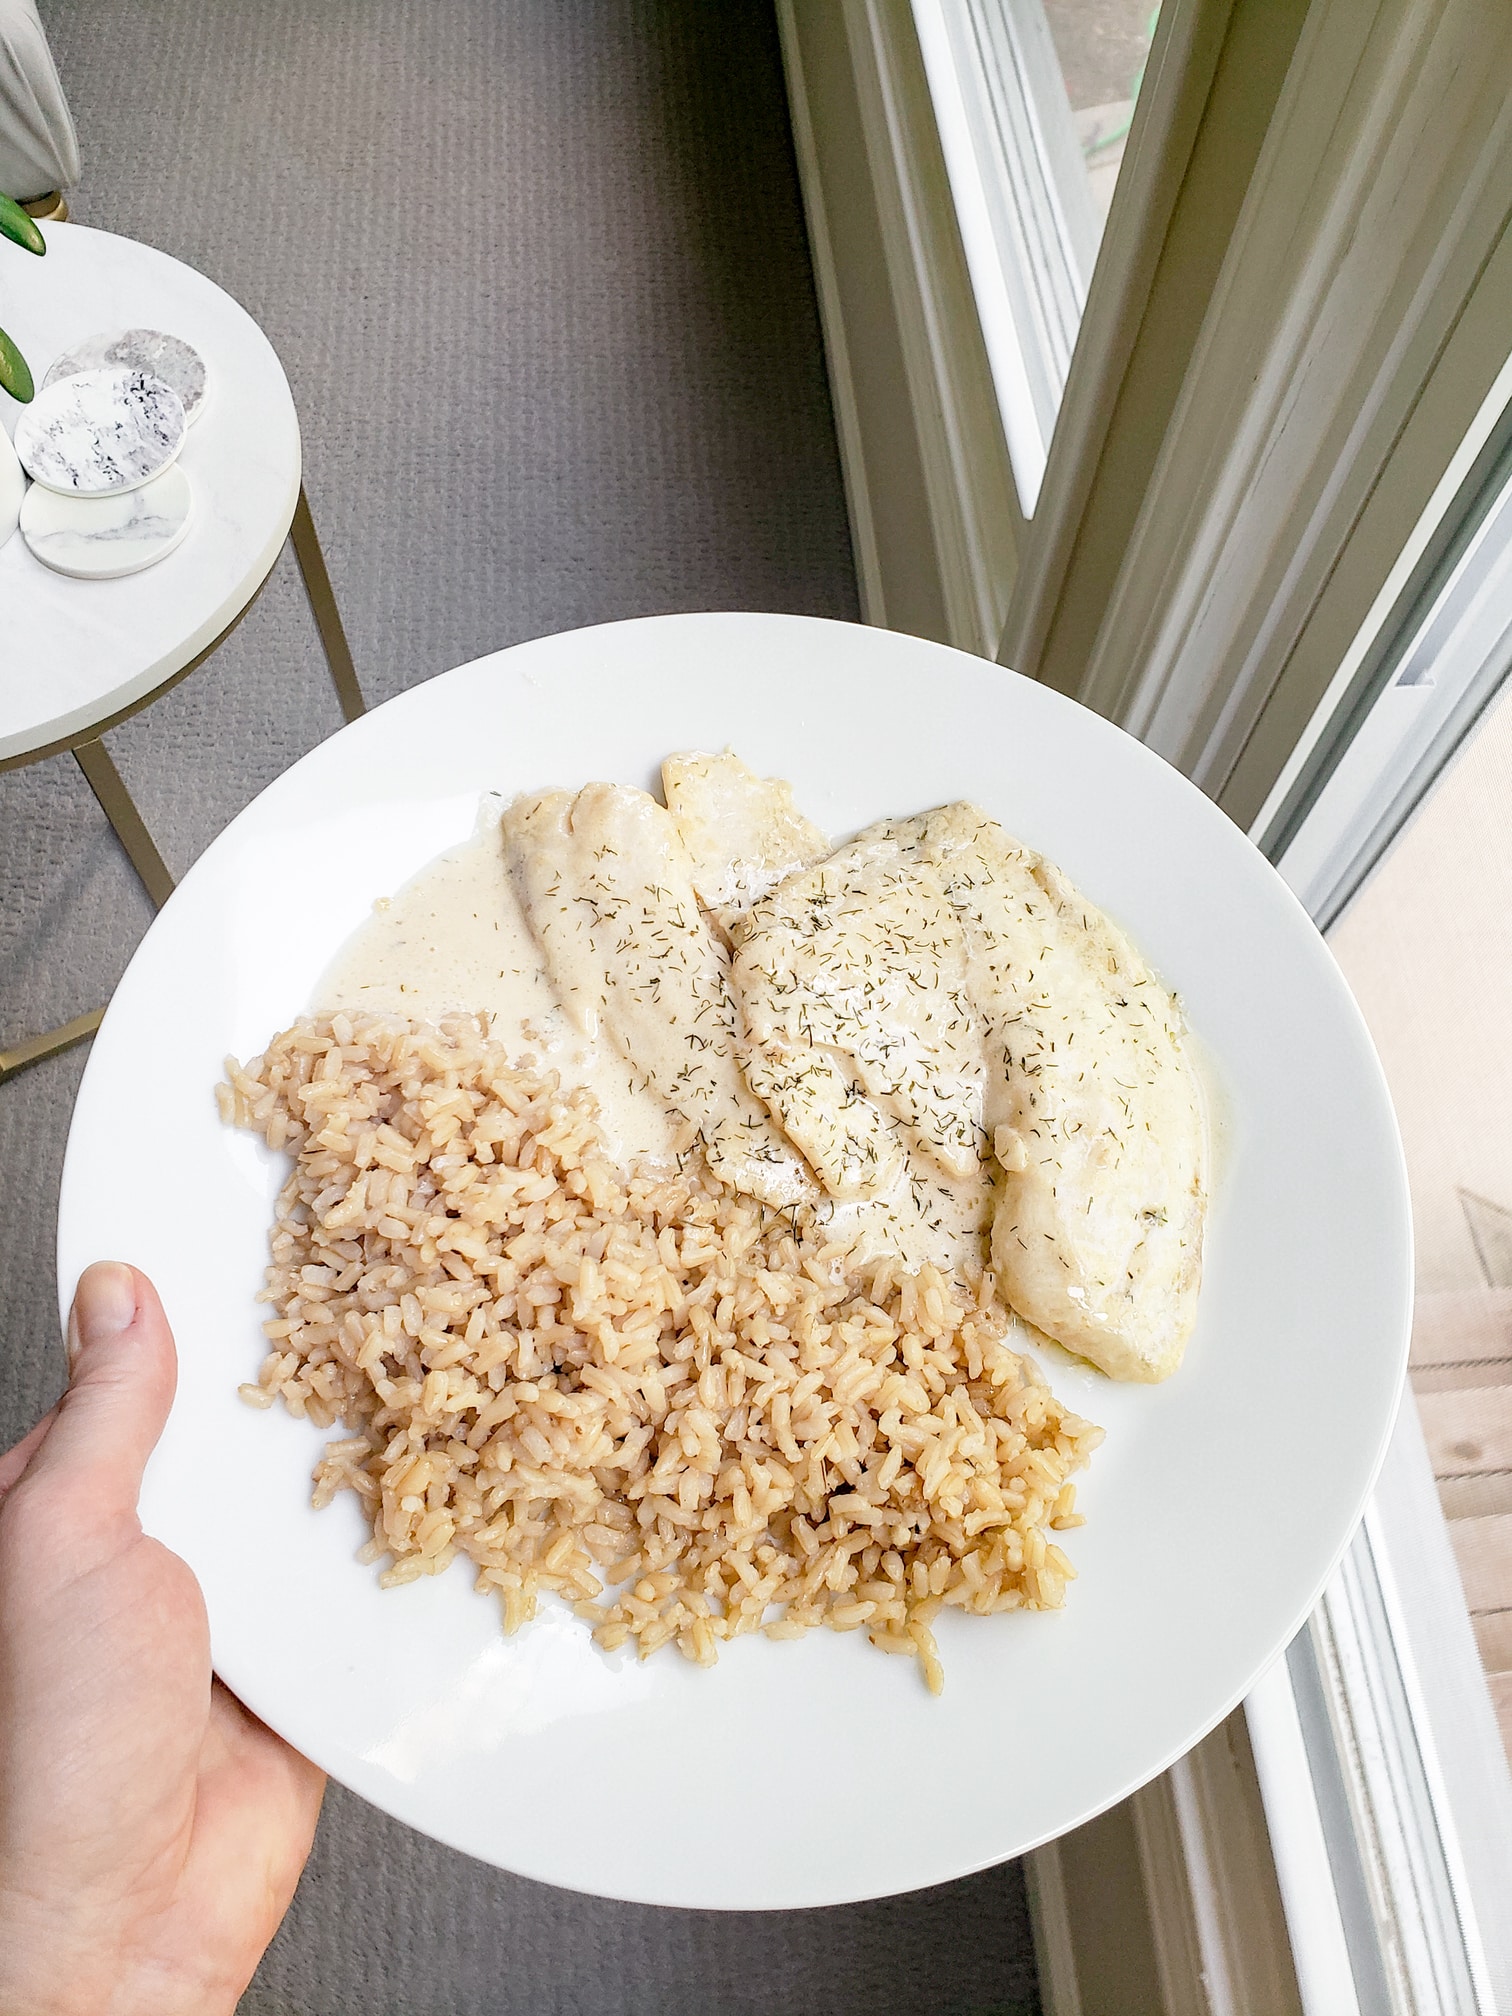 Extra LSR: Currently COVID-19 x Tilapia Dish